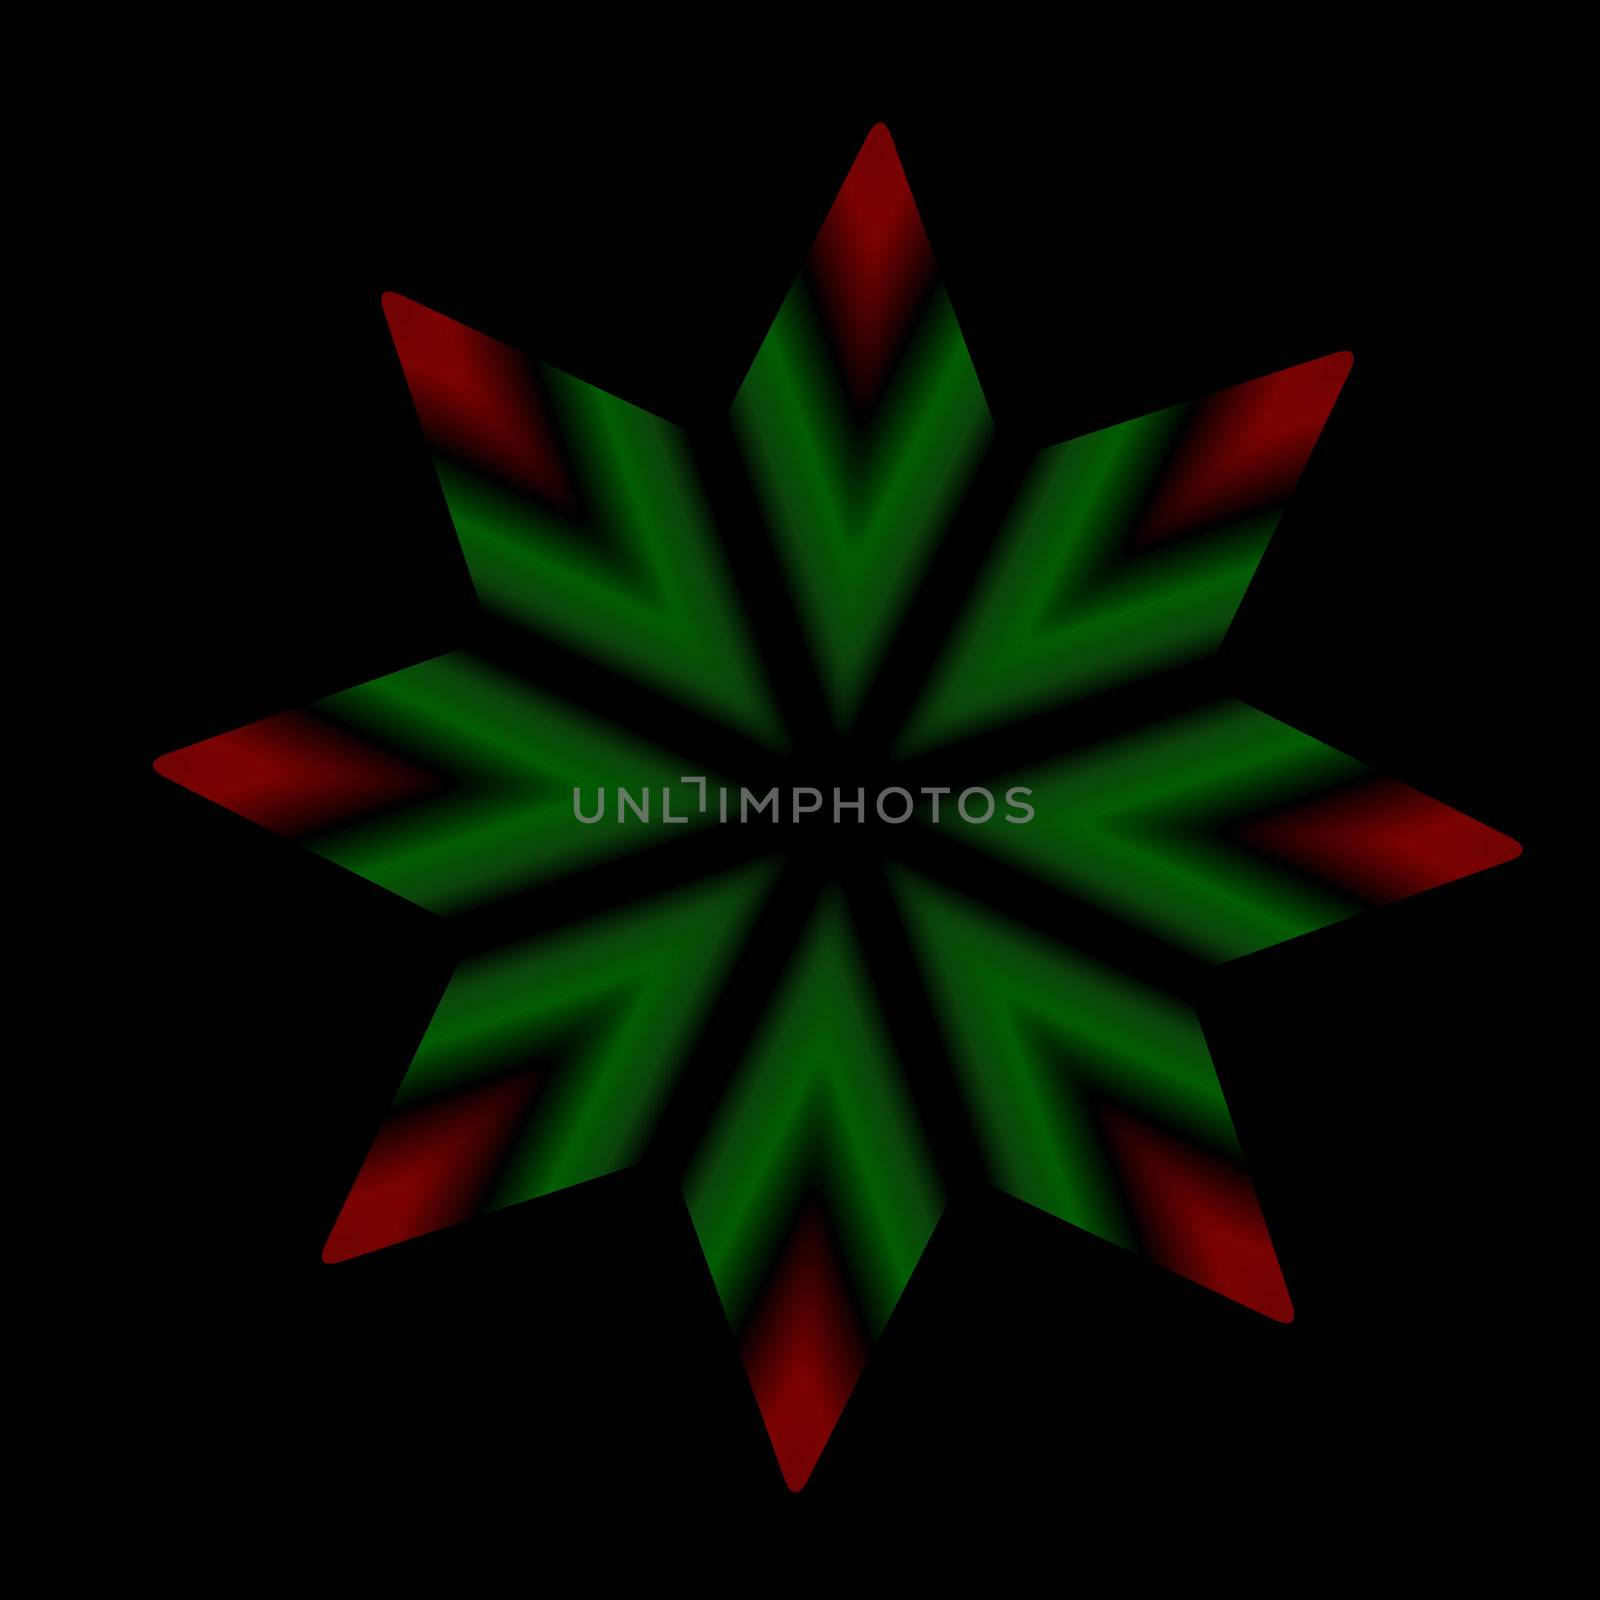 An eight pointed Christmas star done in red and green on a black background.